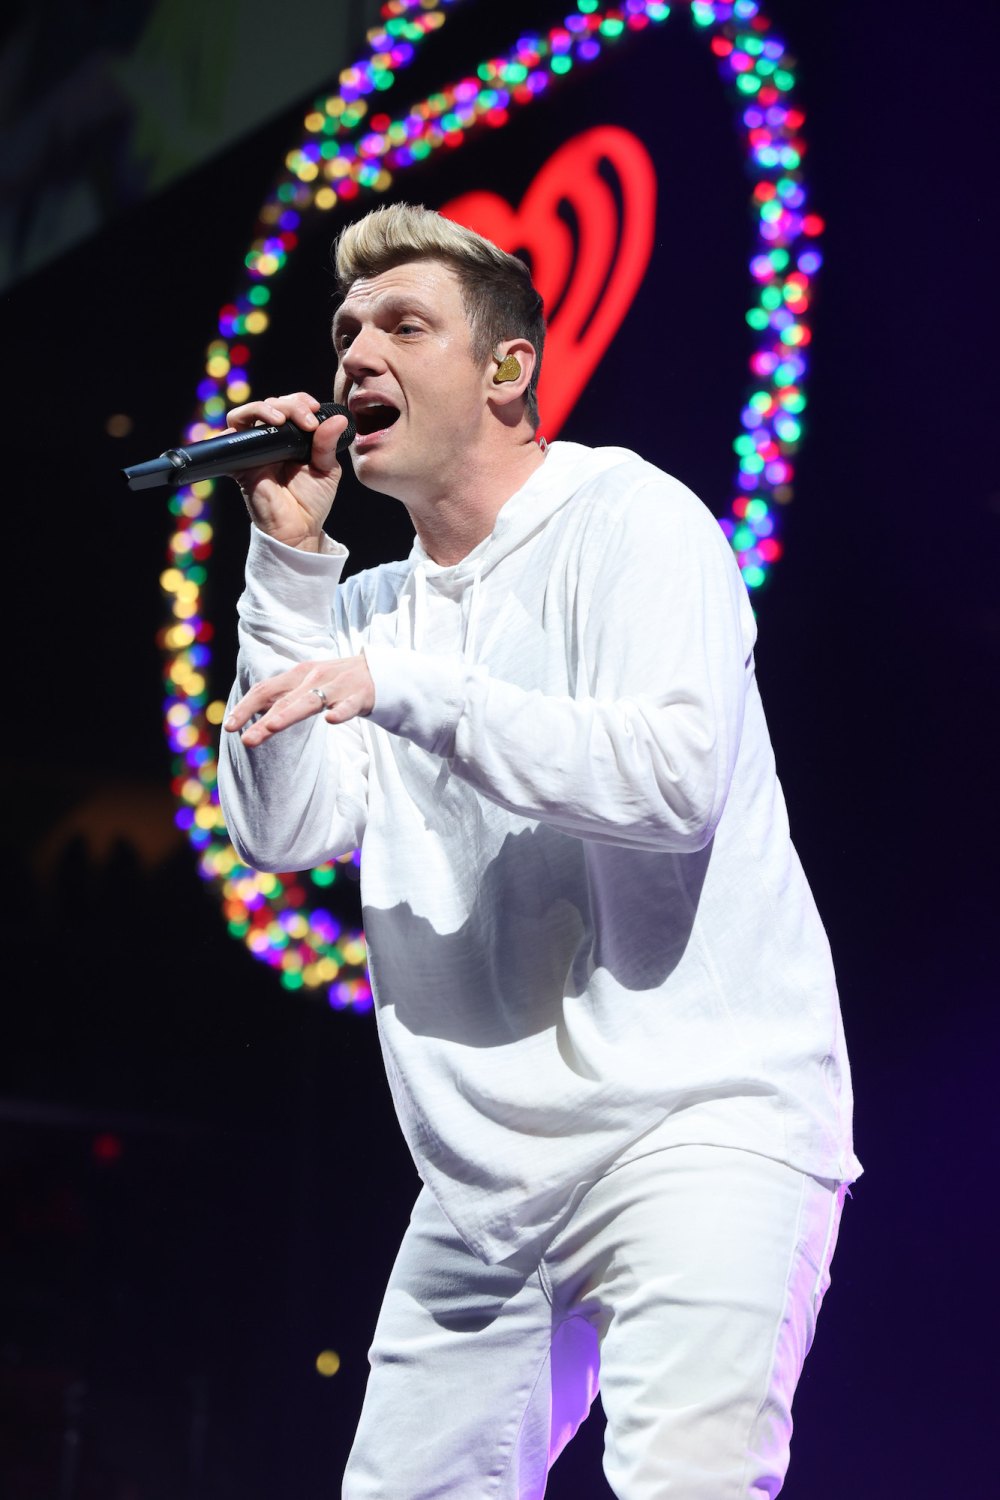 Nick Carter Accused of Sexually Assaulting 15-Year-Old on a Yacht